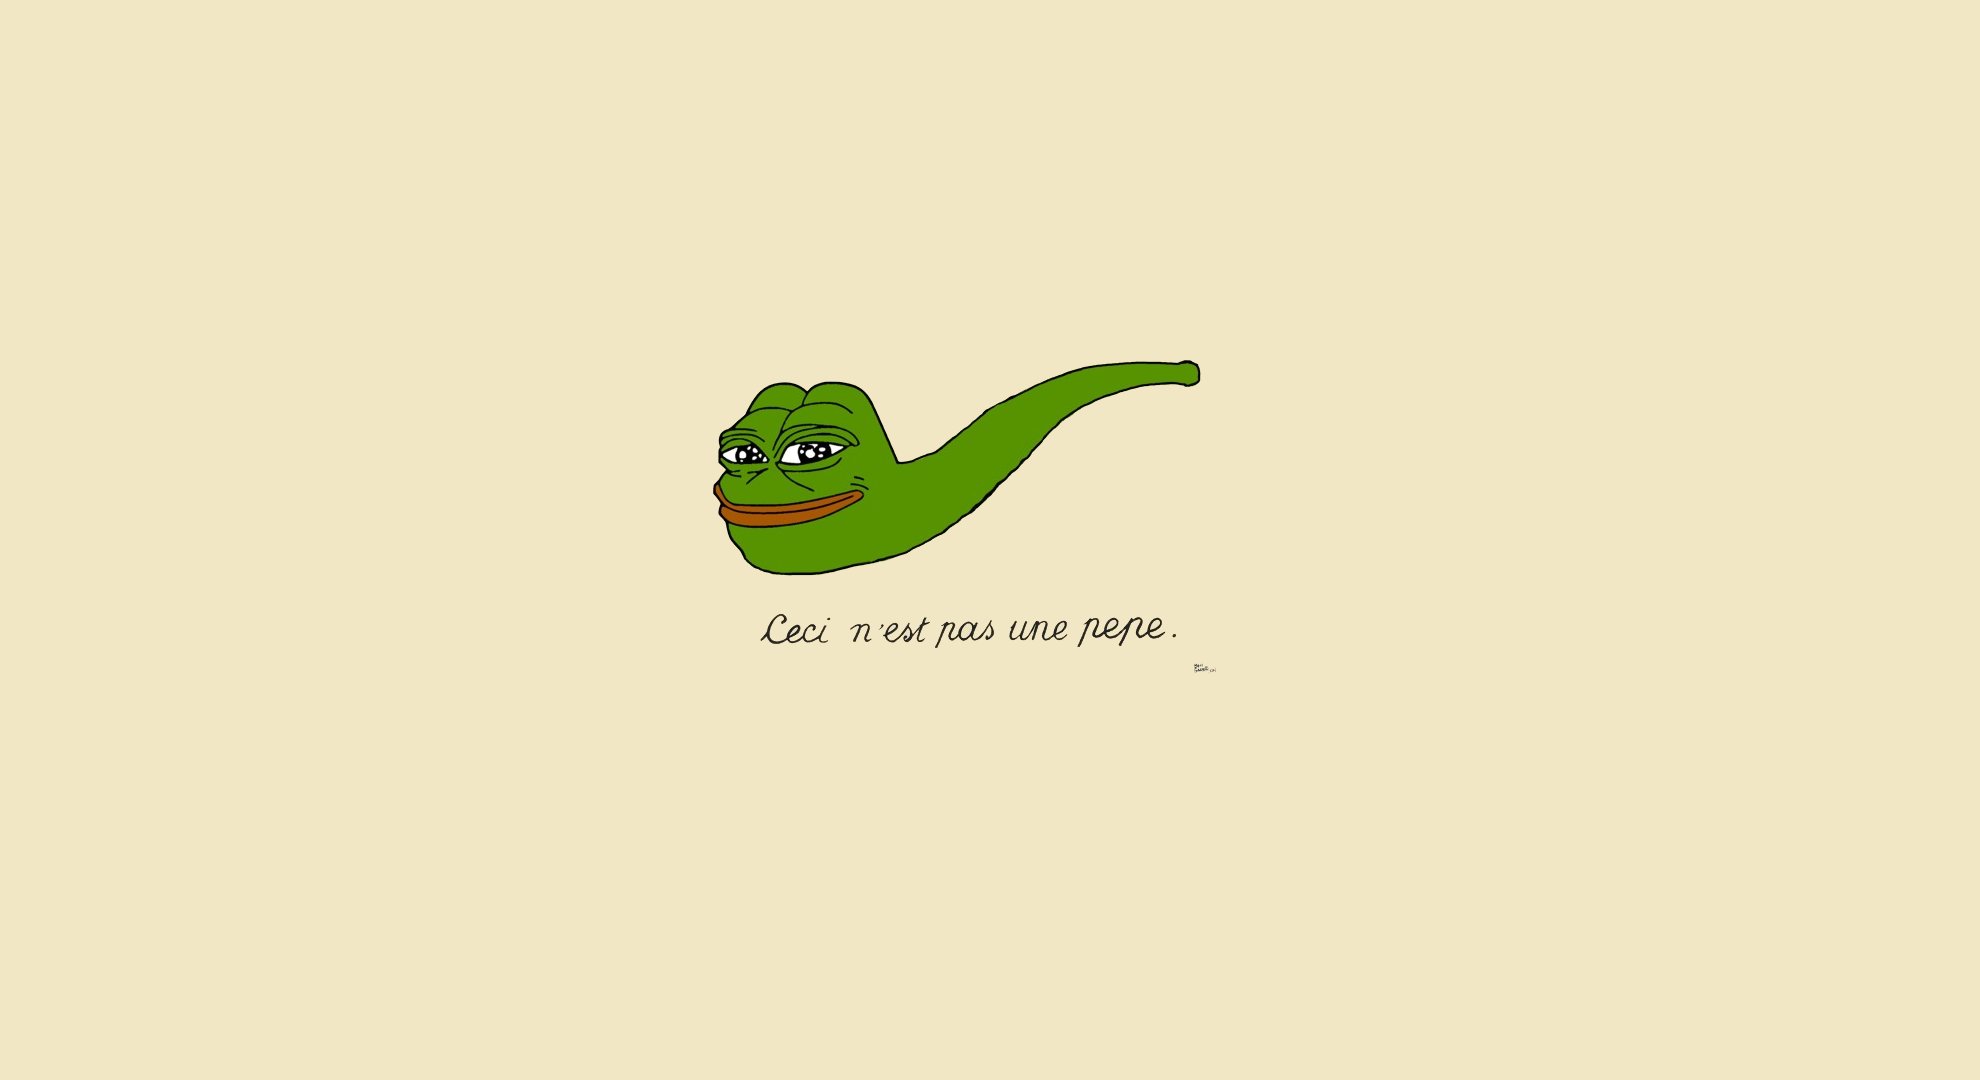 pepe wallpapers, photos and desktop backgrounds up to 8K ...